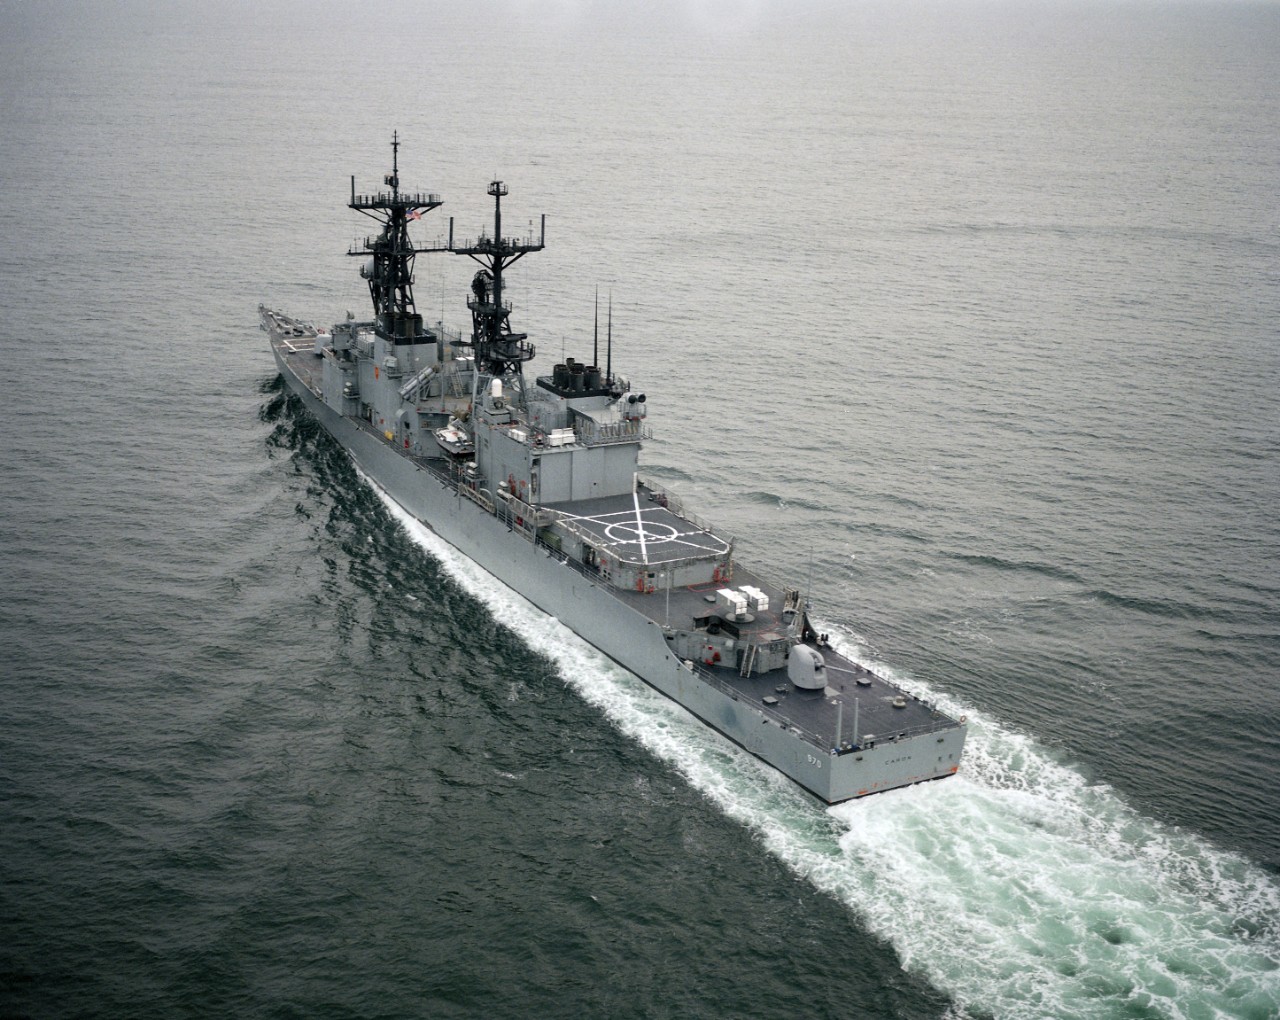 Caron en route to Norfolk, 21 January 1987. (U.S. Navy Photograph DN-SC-88-06593, PHC D. Erickson, National Archives and Records Administration, Still Pictures Division, College Park, Md.)